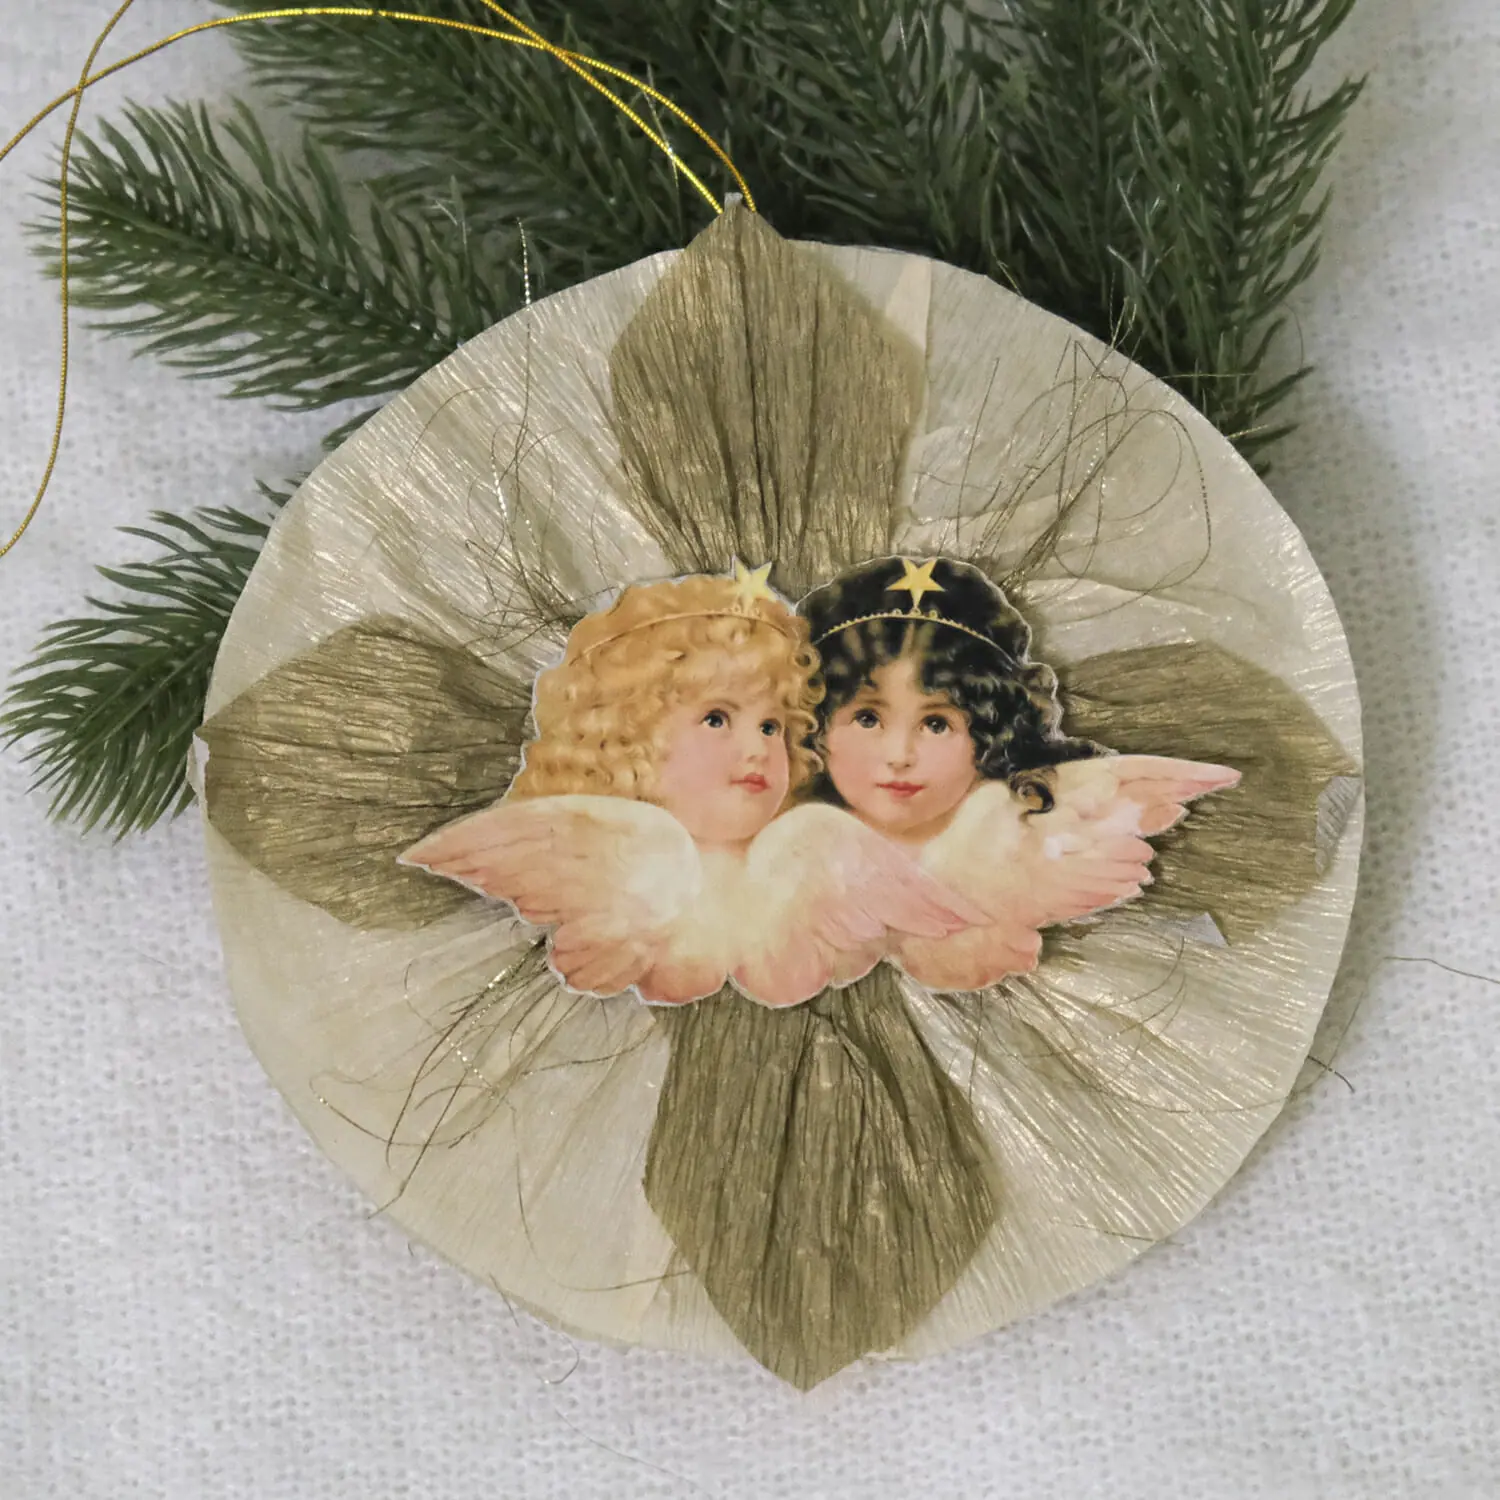 Since the mid-19th century, the traditional Xmas tree decorations a Christmas ornaments has spread throughout the world.